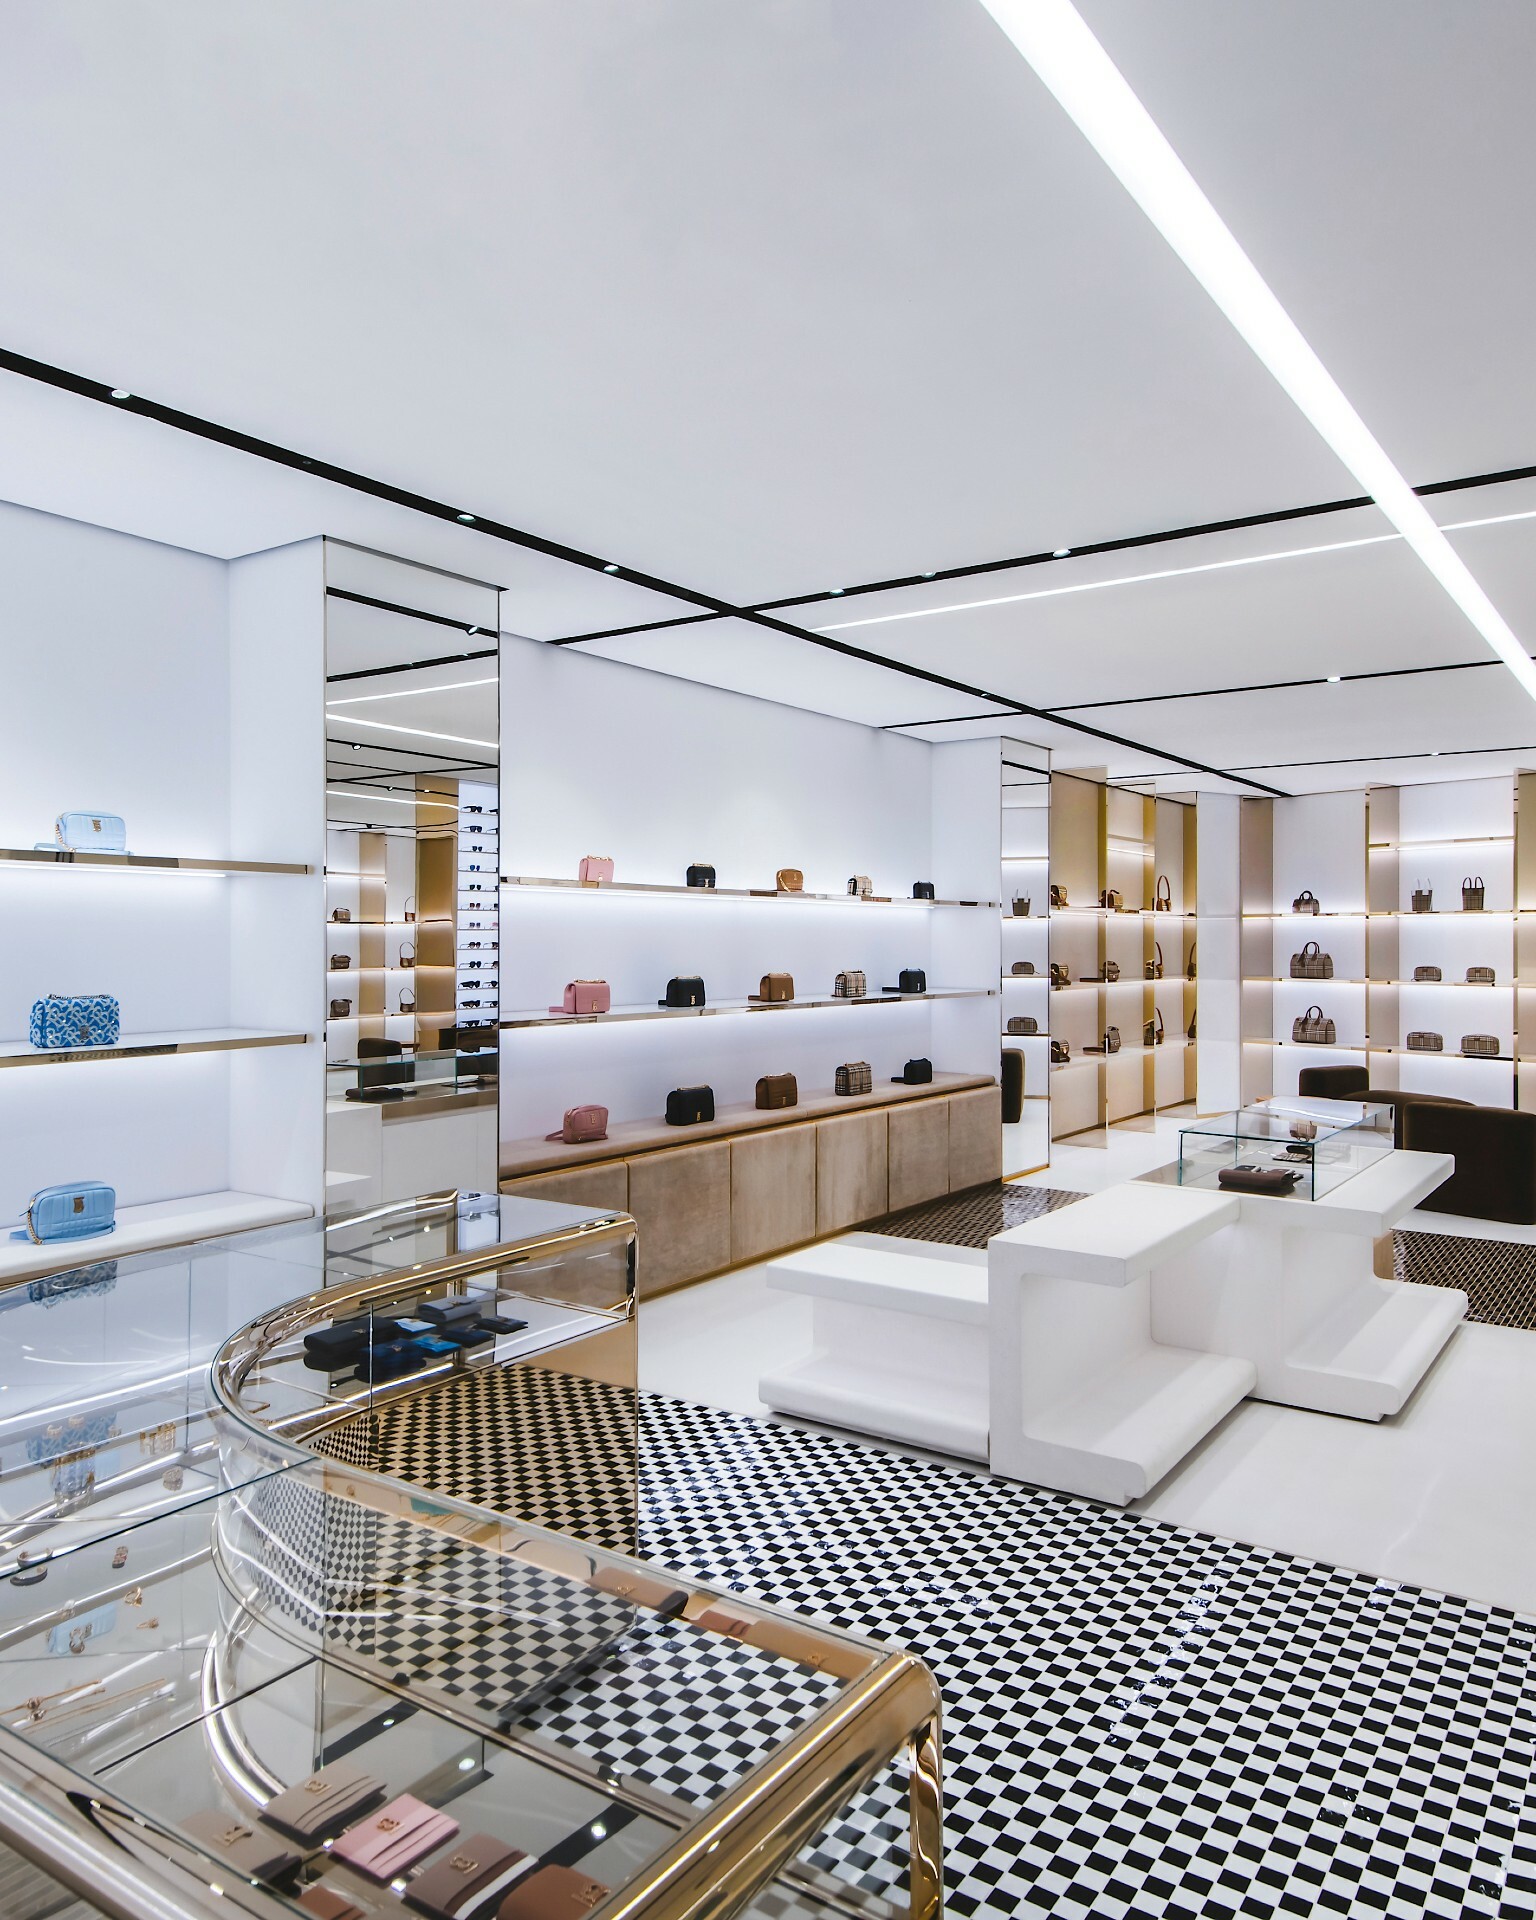 Reopening of Louis Vuitton's Boutique in London